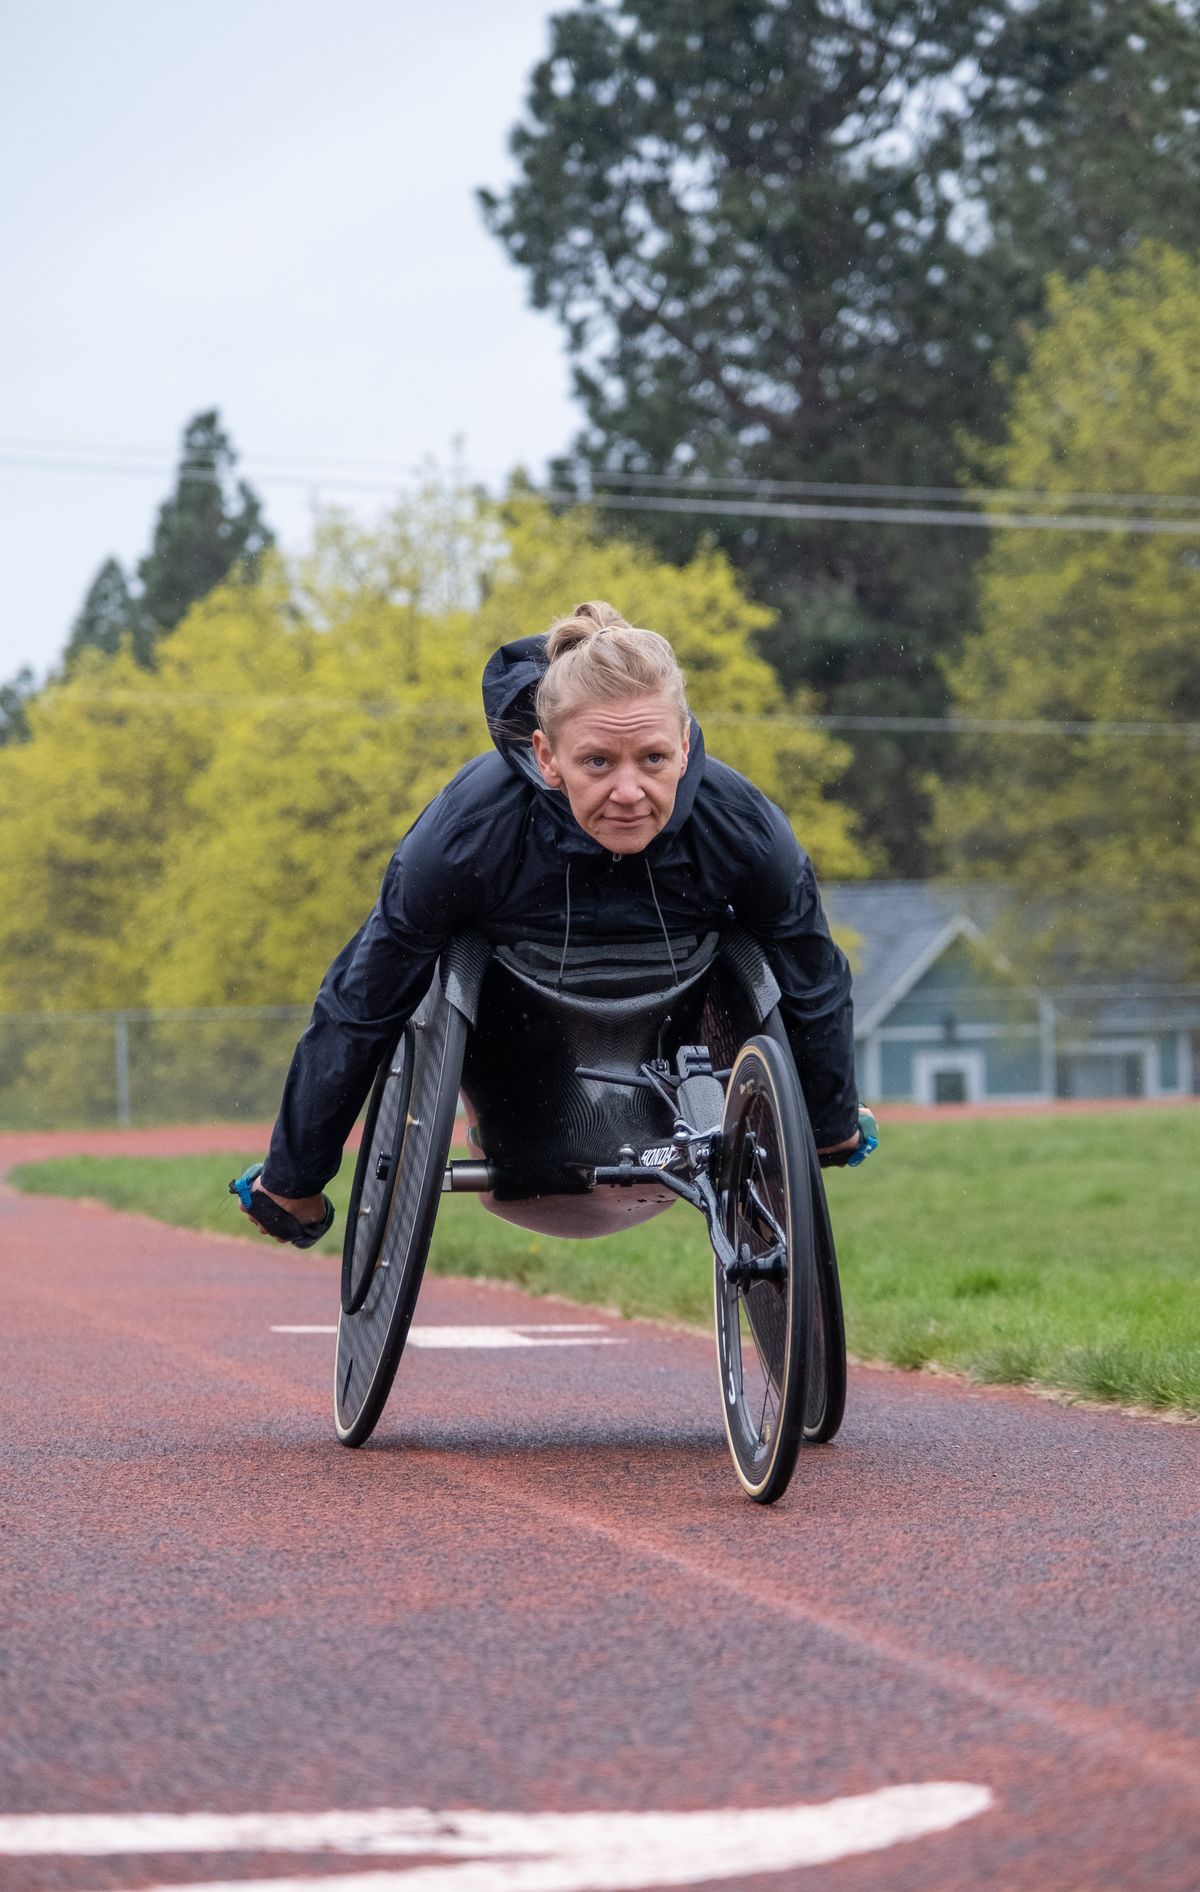 Tekoa native Susannah Scaroni pushes down the track during a practice session on Saturday, April 30, 2022, at Valley Christian School in Spokane Valley, Washington. Scaroni is the defending Bloomsday women